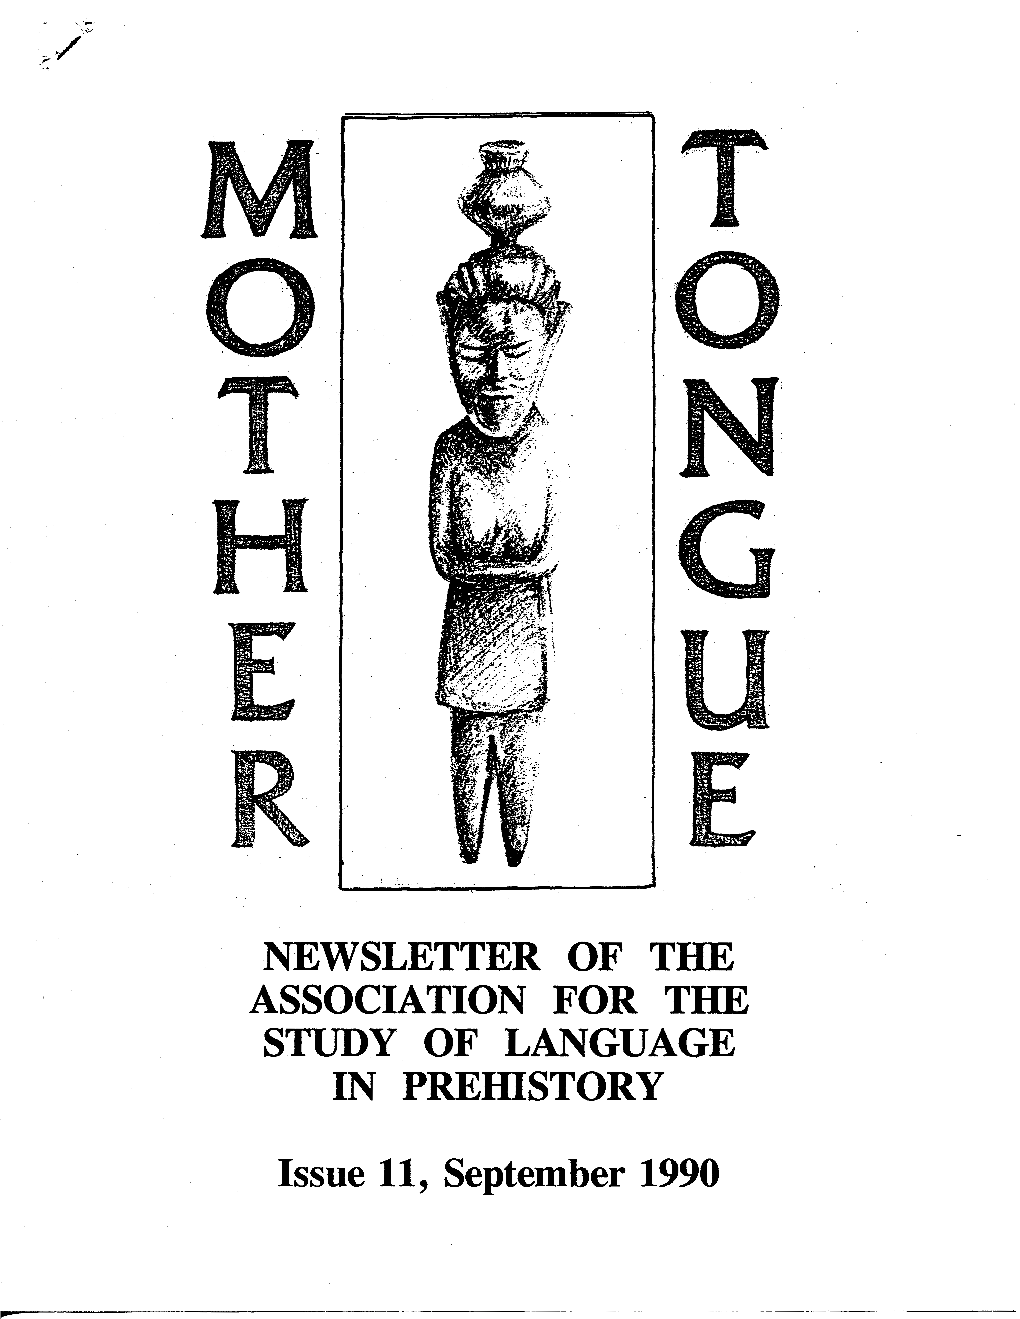 NEWSLETTER of the ASSOCIATION for the STUDY of LANGUAGE in PREIDSTORY Issue 11, September 1990